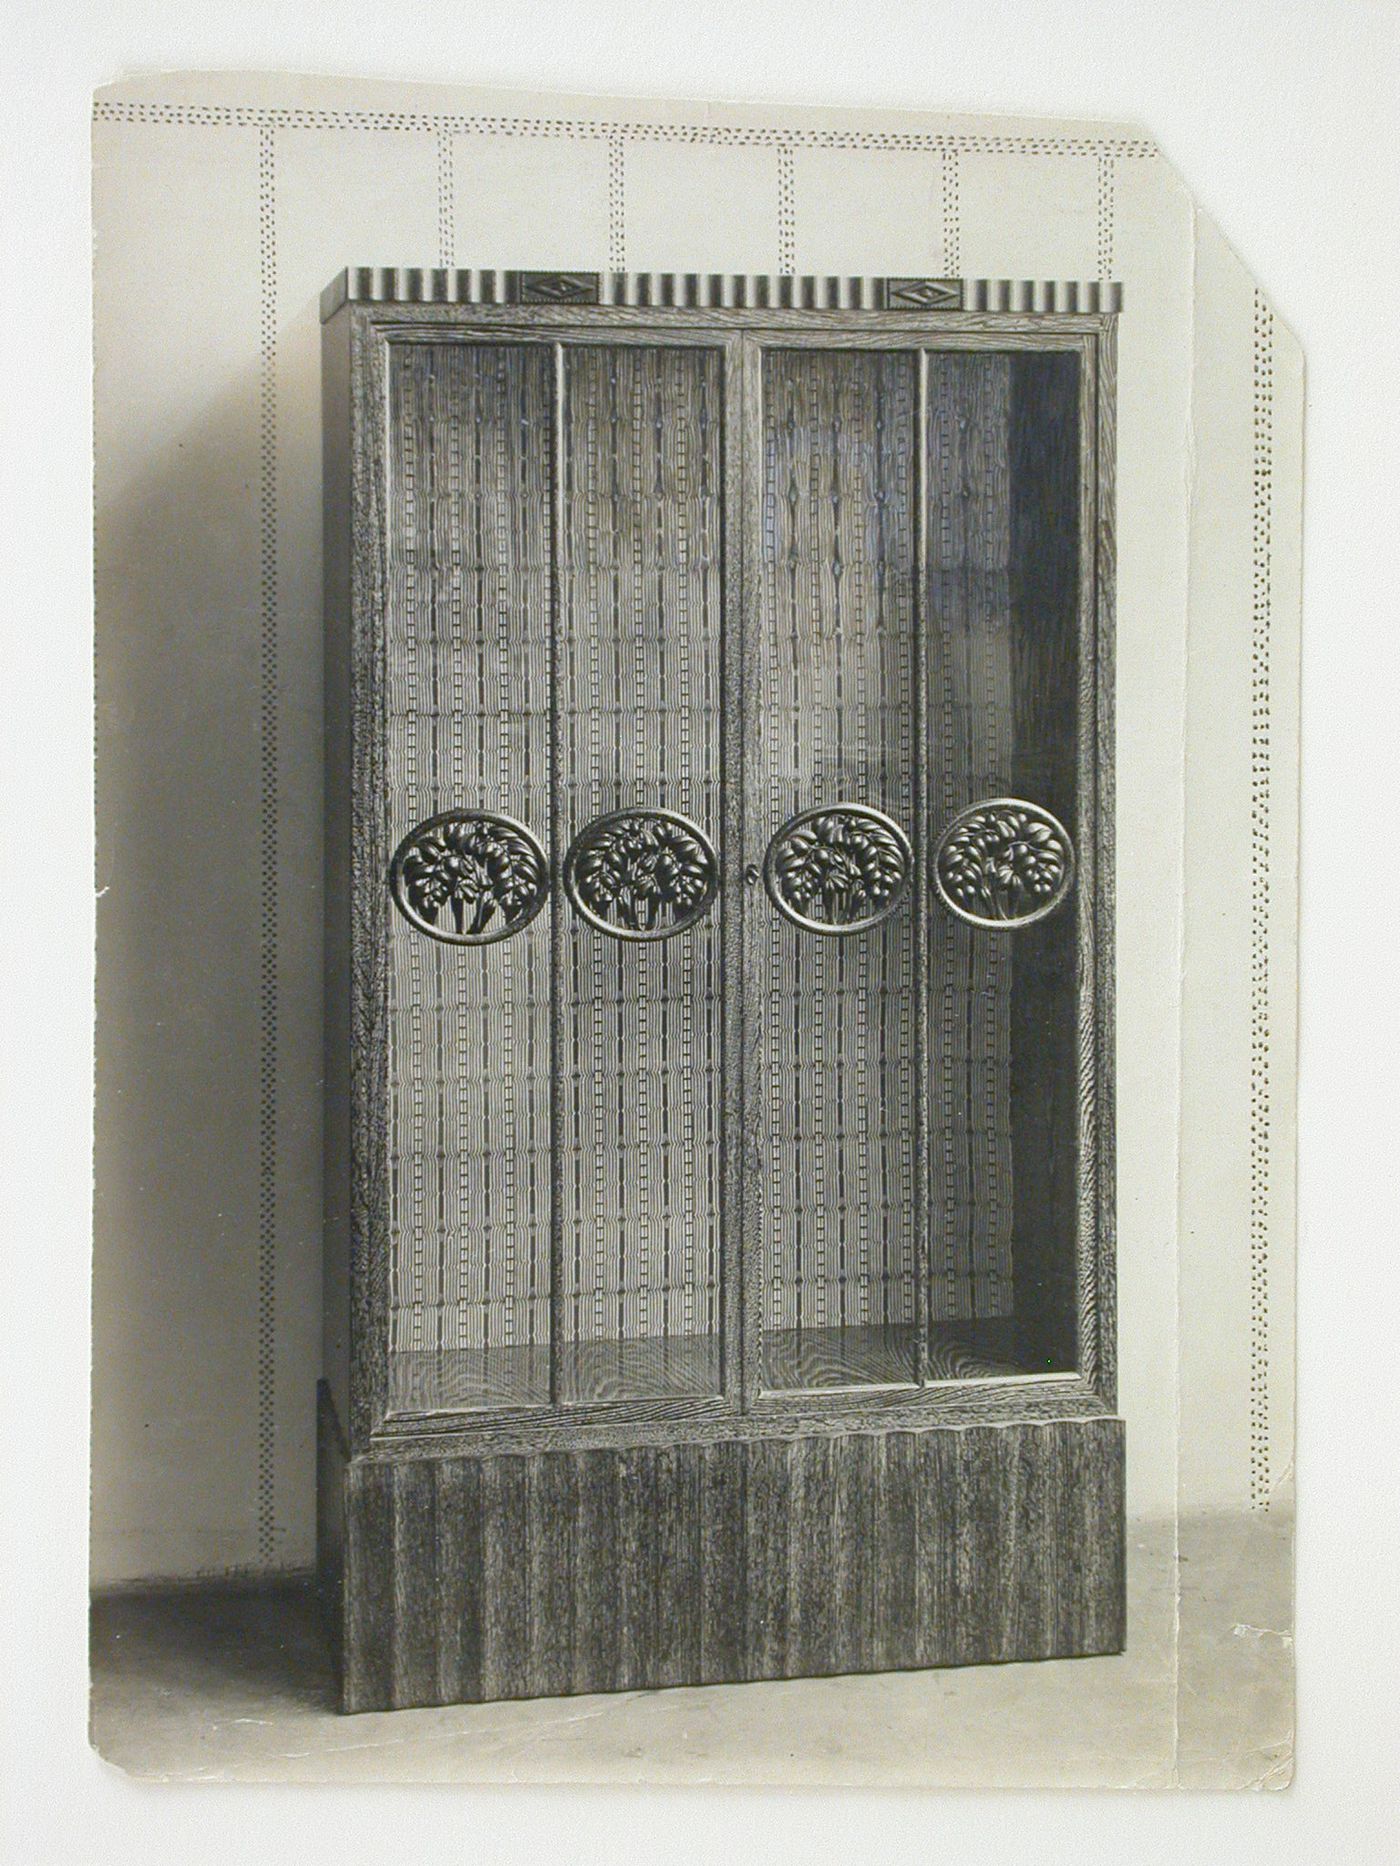 View of a wooden cabinet for the Hodlers' apartment, Geneva, Switzerland